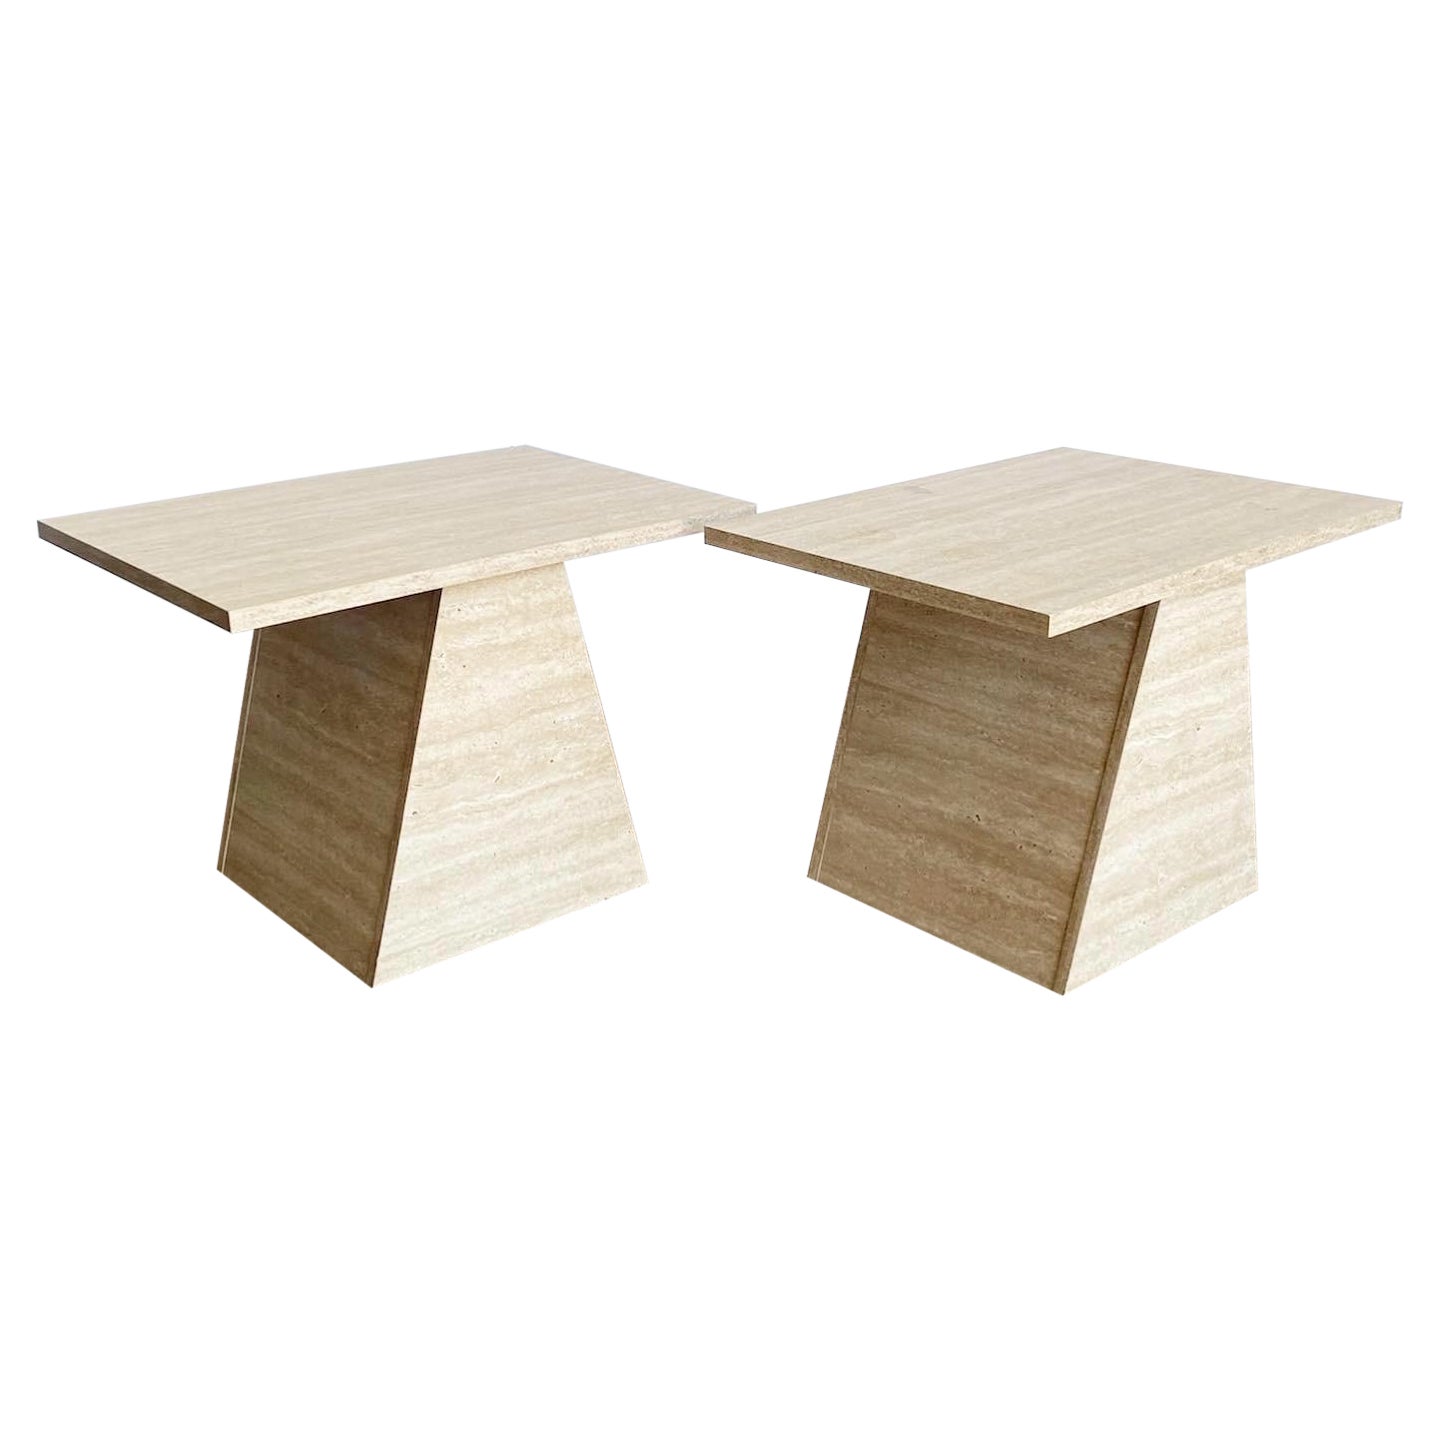 Postmodern Faux Travertine Laminate Side Tables - a Pair For Sale